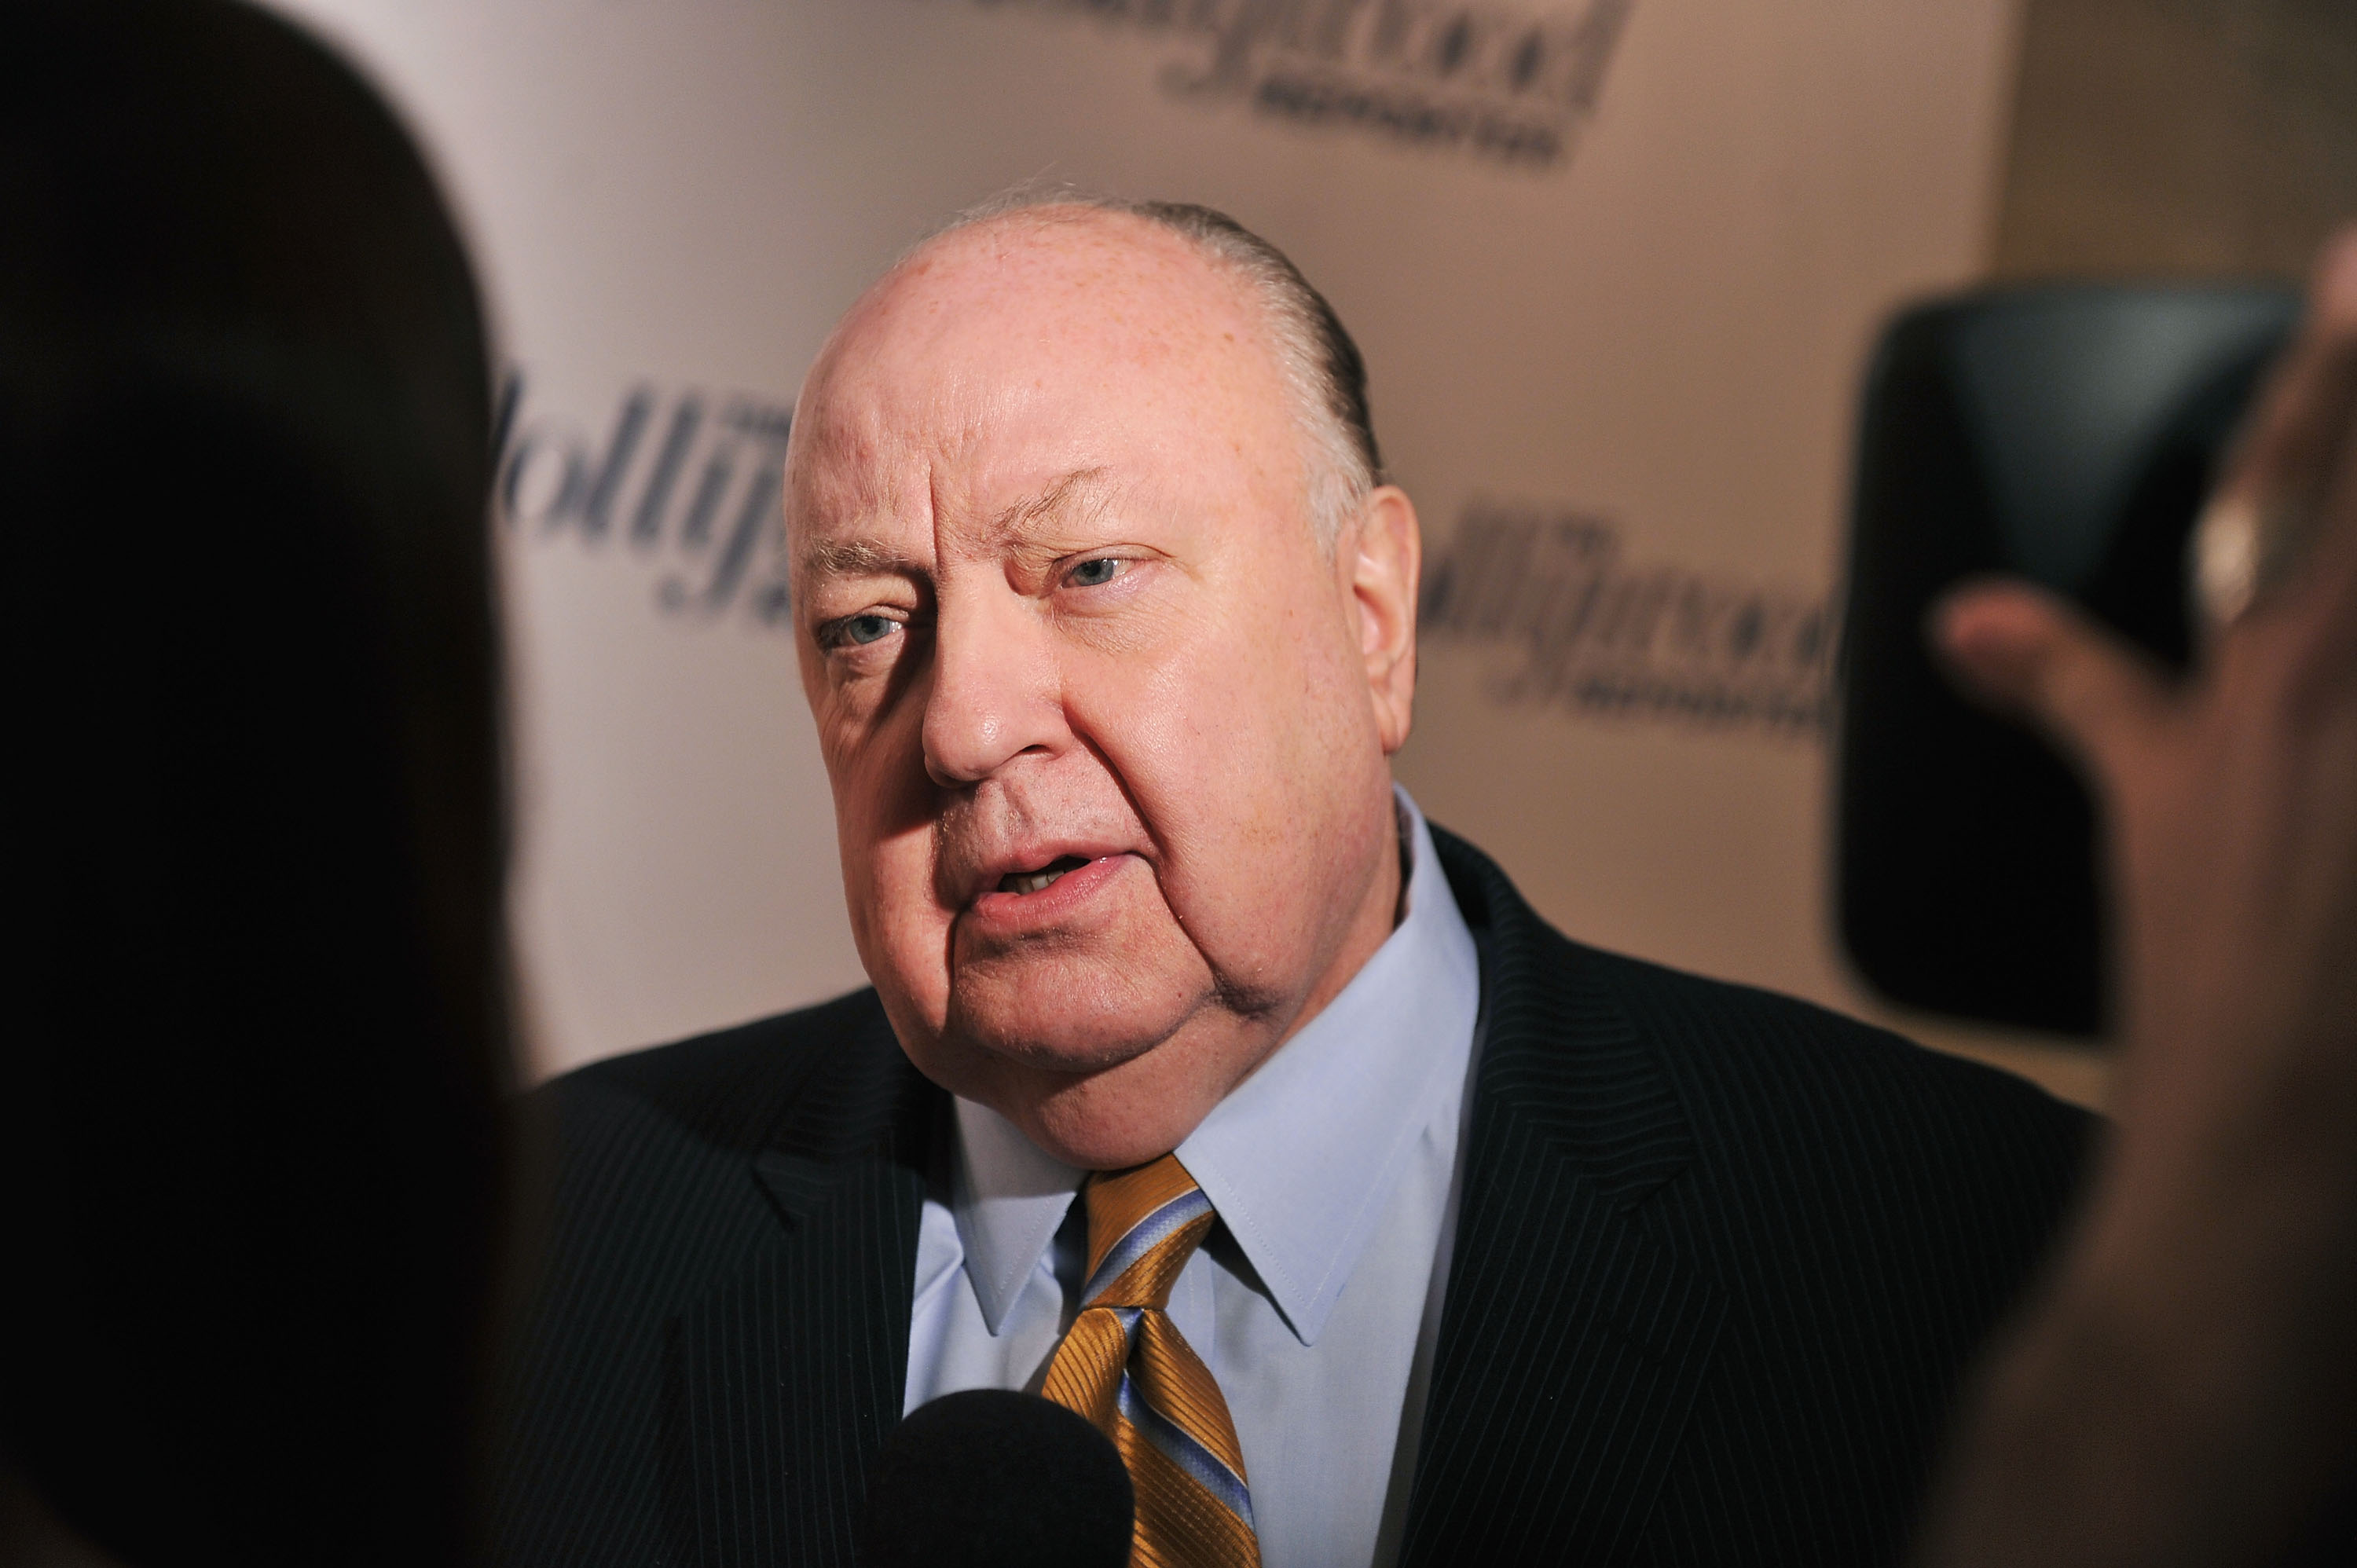 Roger Ailes attends the Hollywood Reporter celebration of "The 35 Most Powerful People in Media" at the Four Season Grill Room in New York City on April 11, 2012. (Stephen Lovekin—Getty Images)